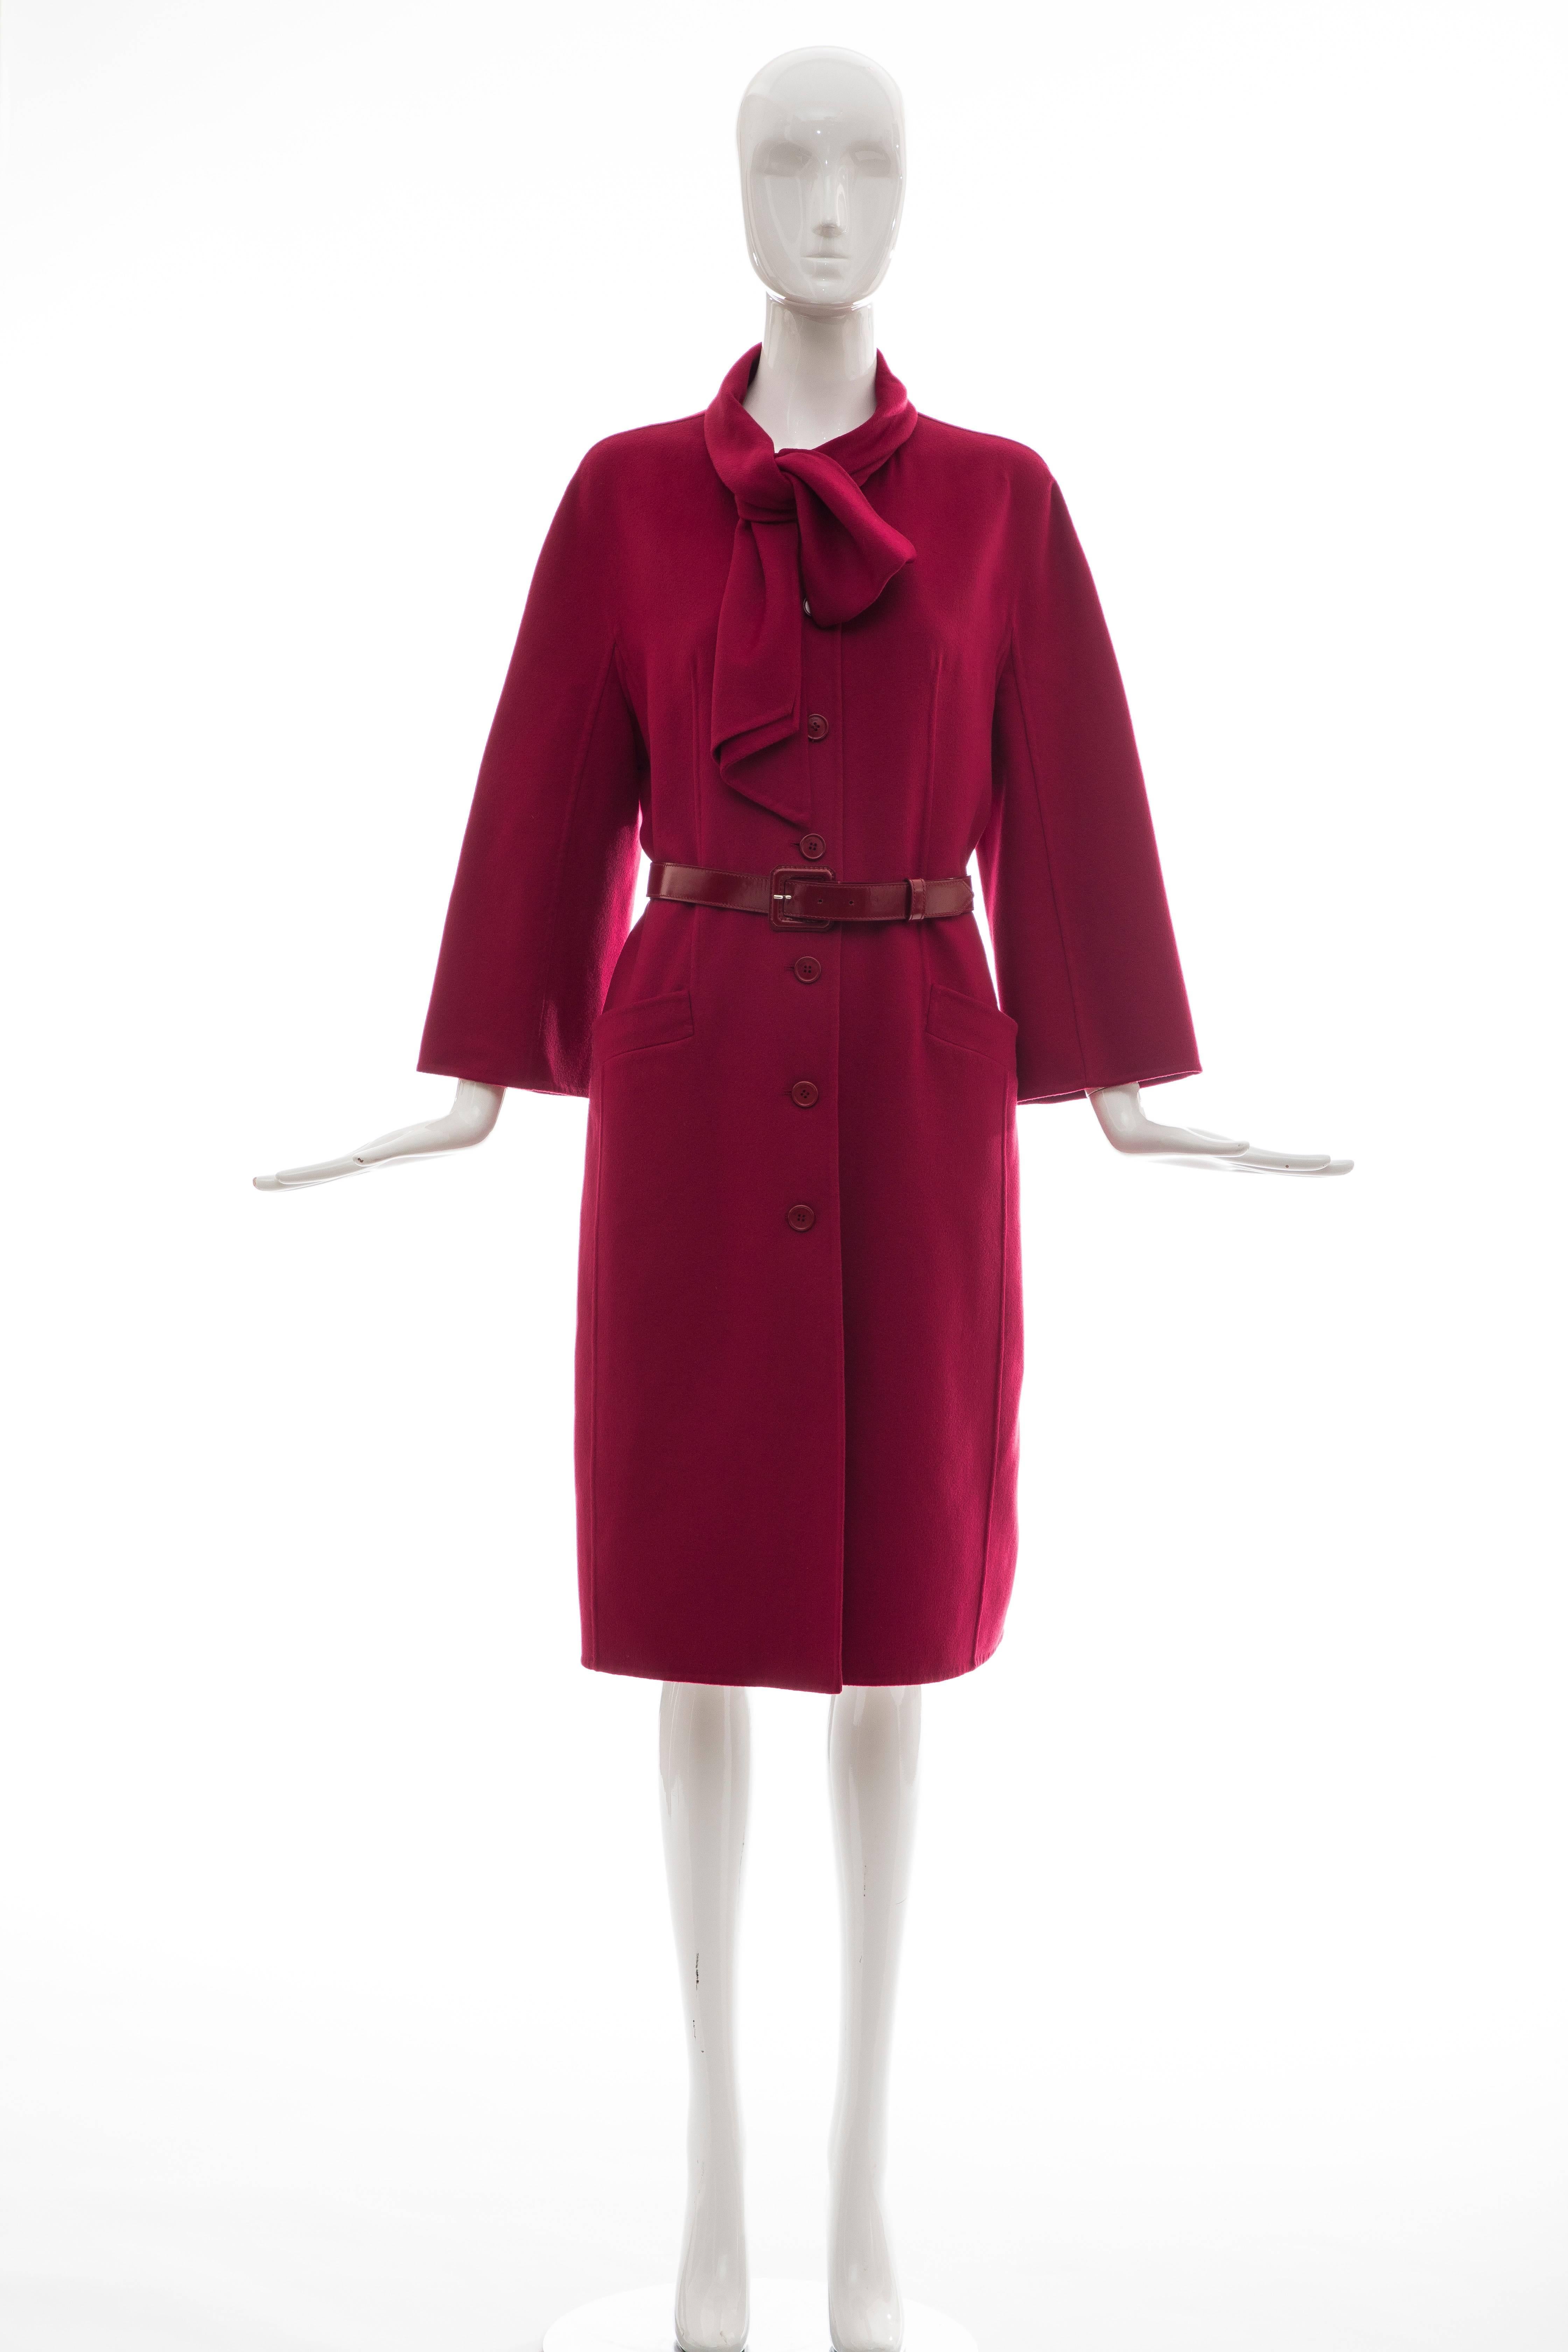 Christian Dior crimson red cashmere long coat with three-quarter sleeves, leather belt at waist, dual slit pockets at front and button closures at front.

FR. 40, US. 8

Bust: 38, Waist 37, Shoulder 18, Length 41.25, Sleeve 27

